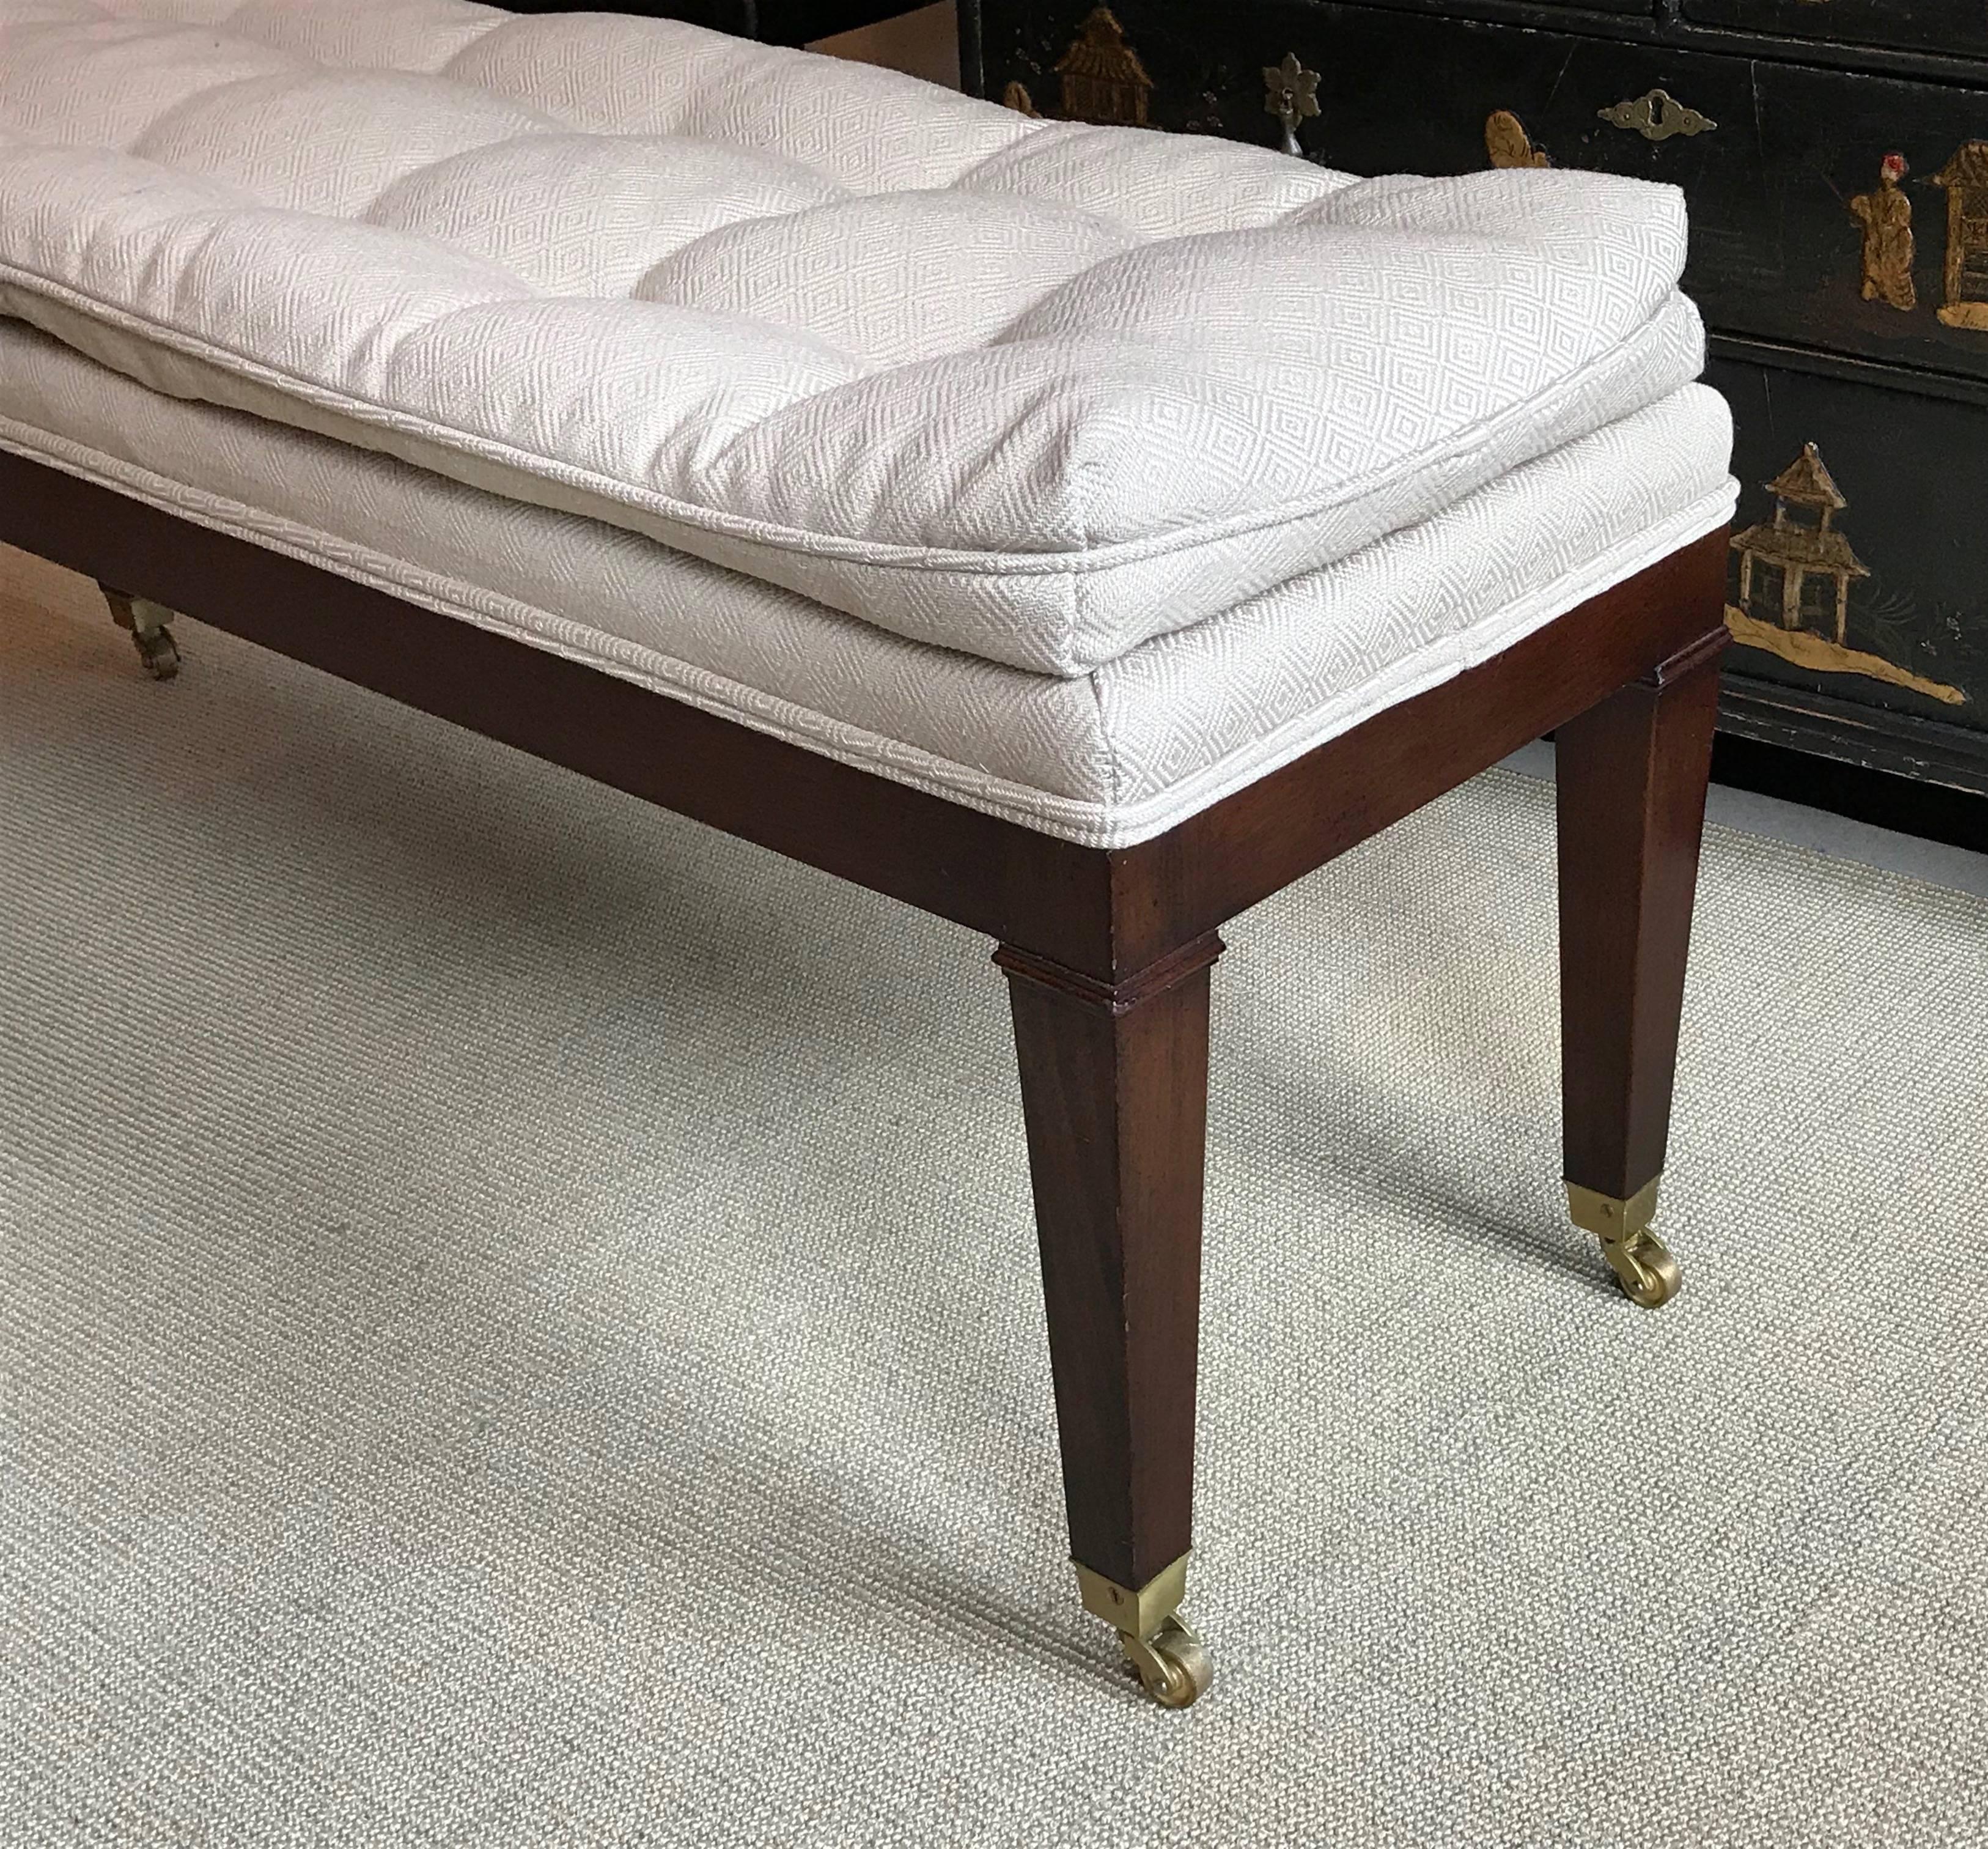 Mid-20th Century Upholstered Mahogany Long Bench with Brass Casters